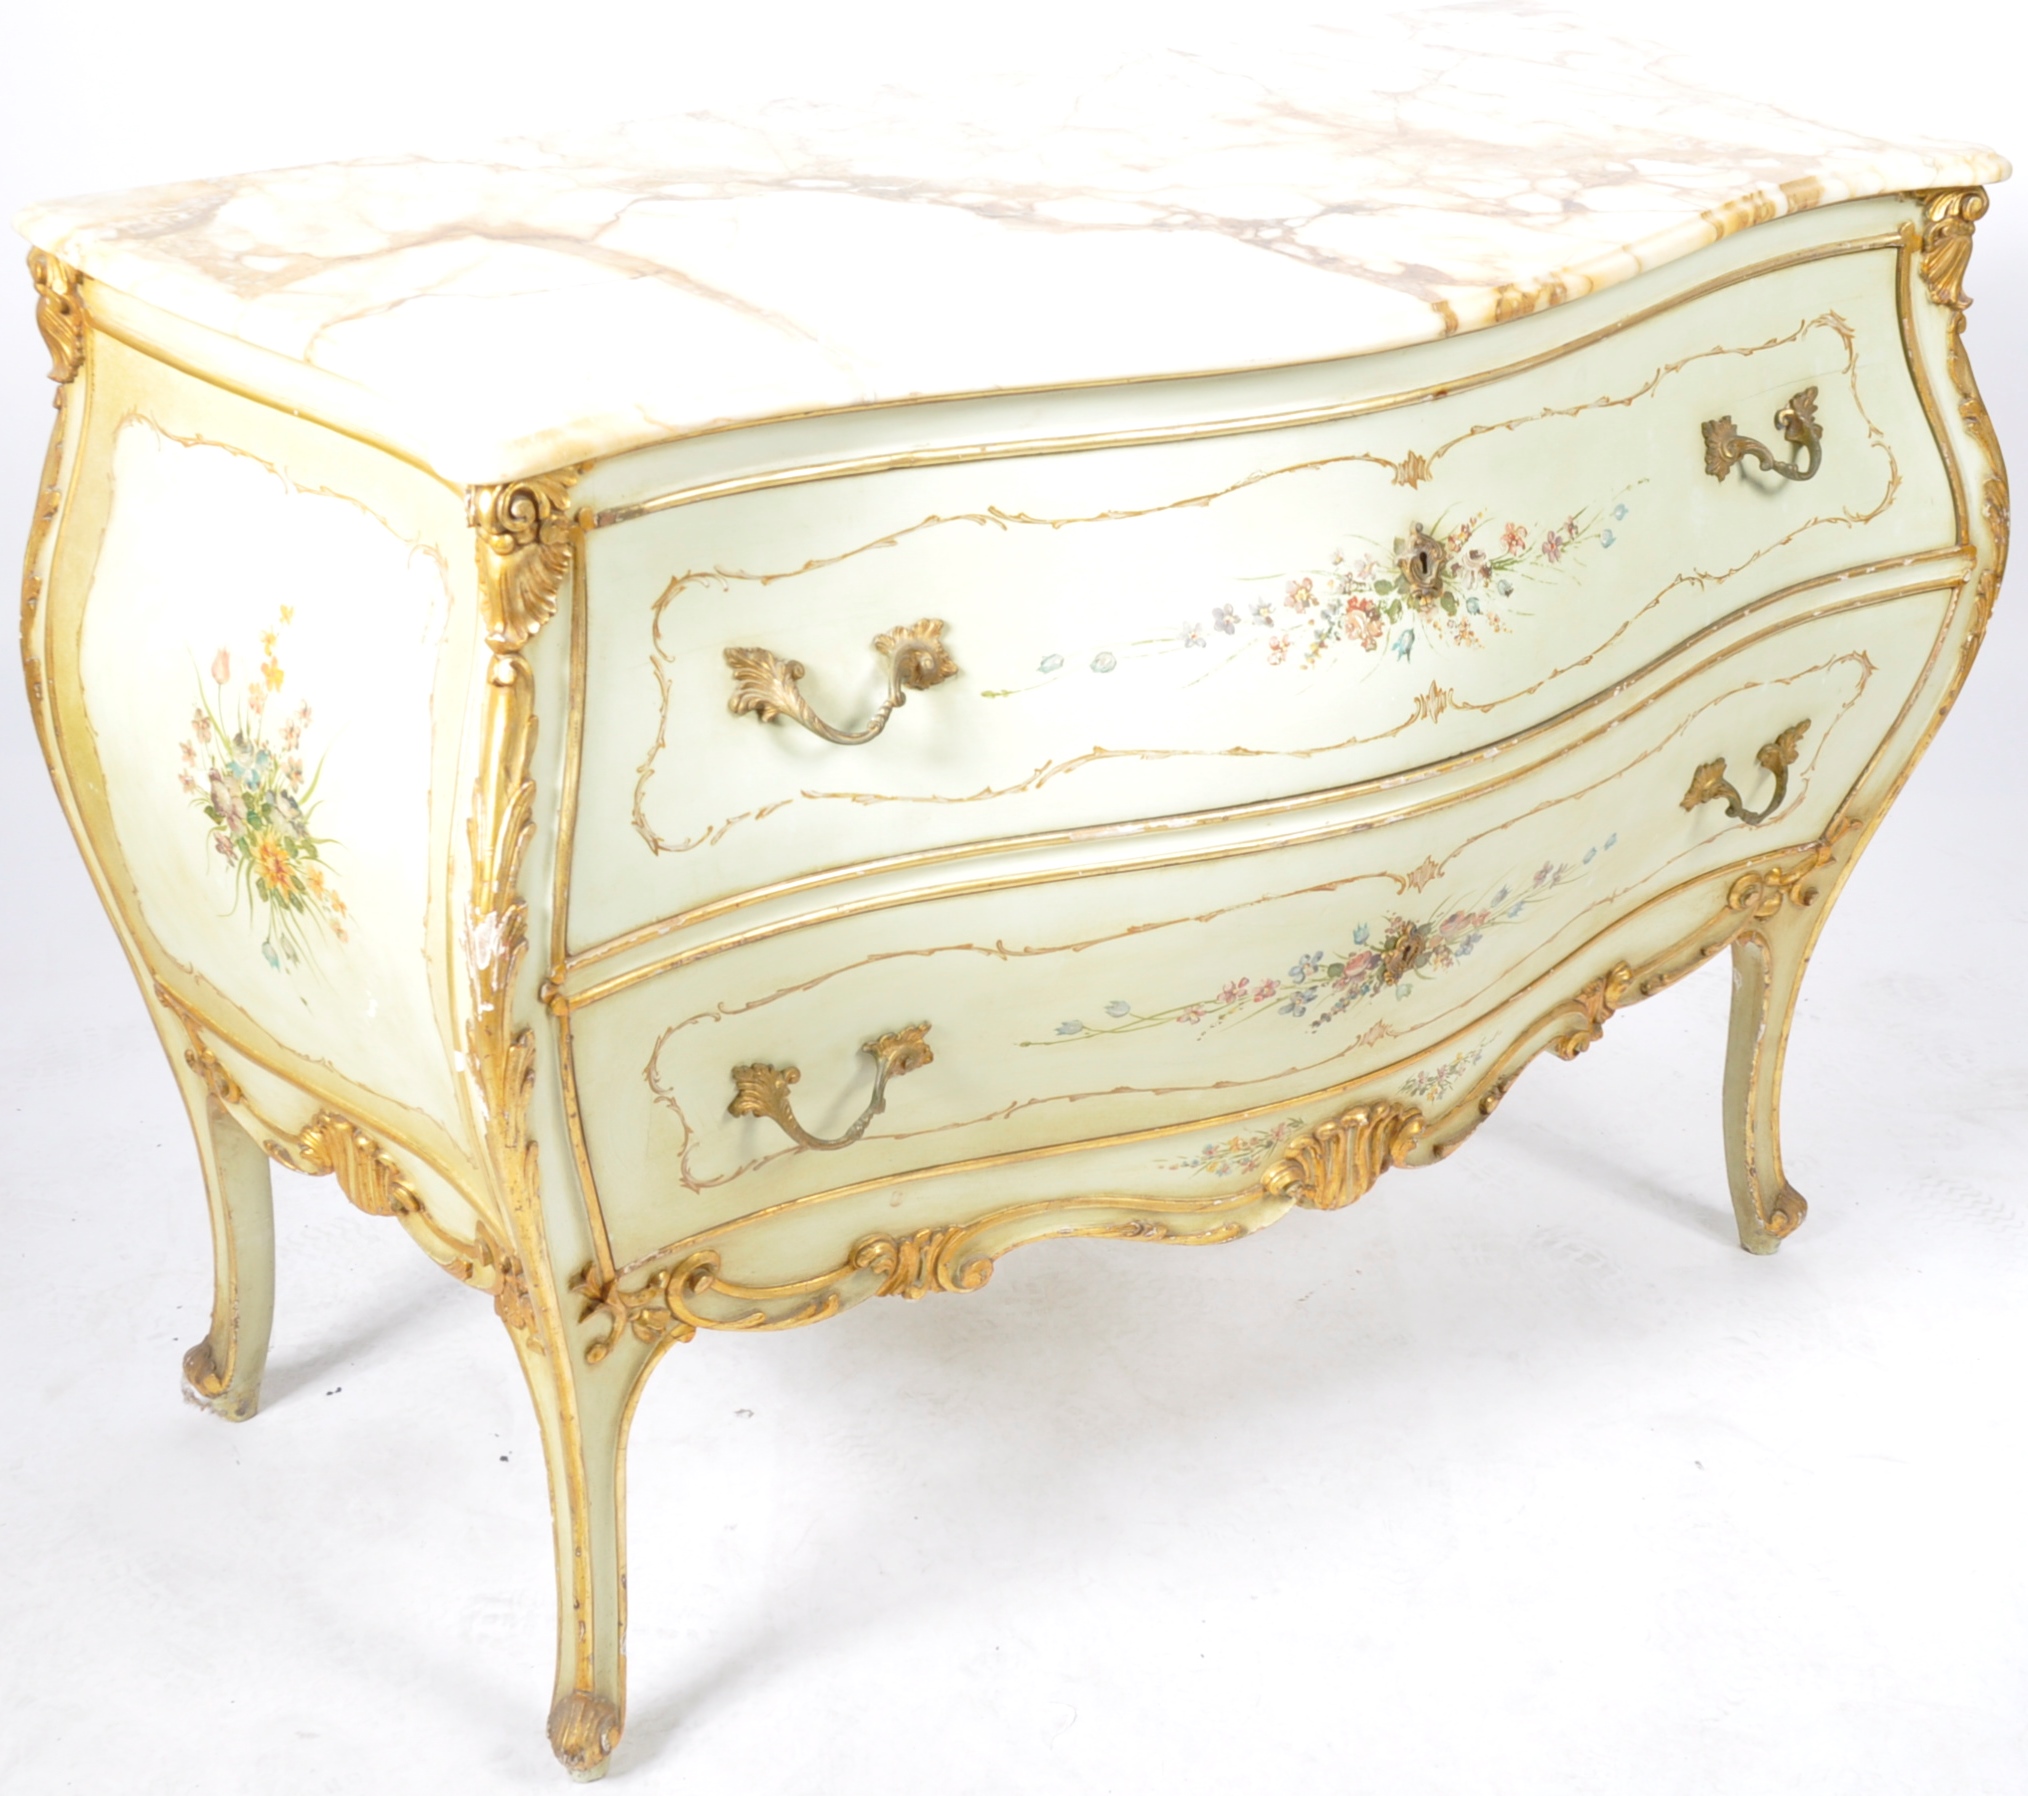 LARGE ANTIQUE VENETIAN ITALIAN MARBLE TOP COMMODE CHEST - Image 3 of 9